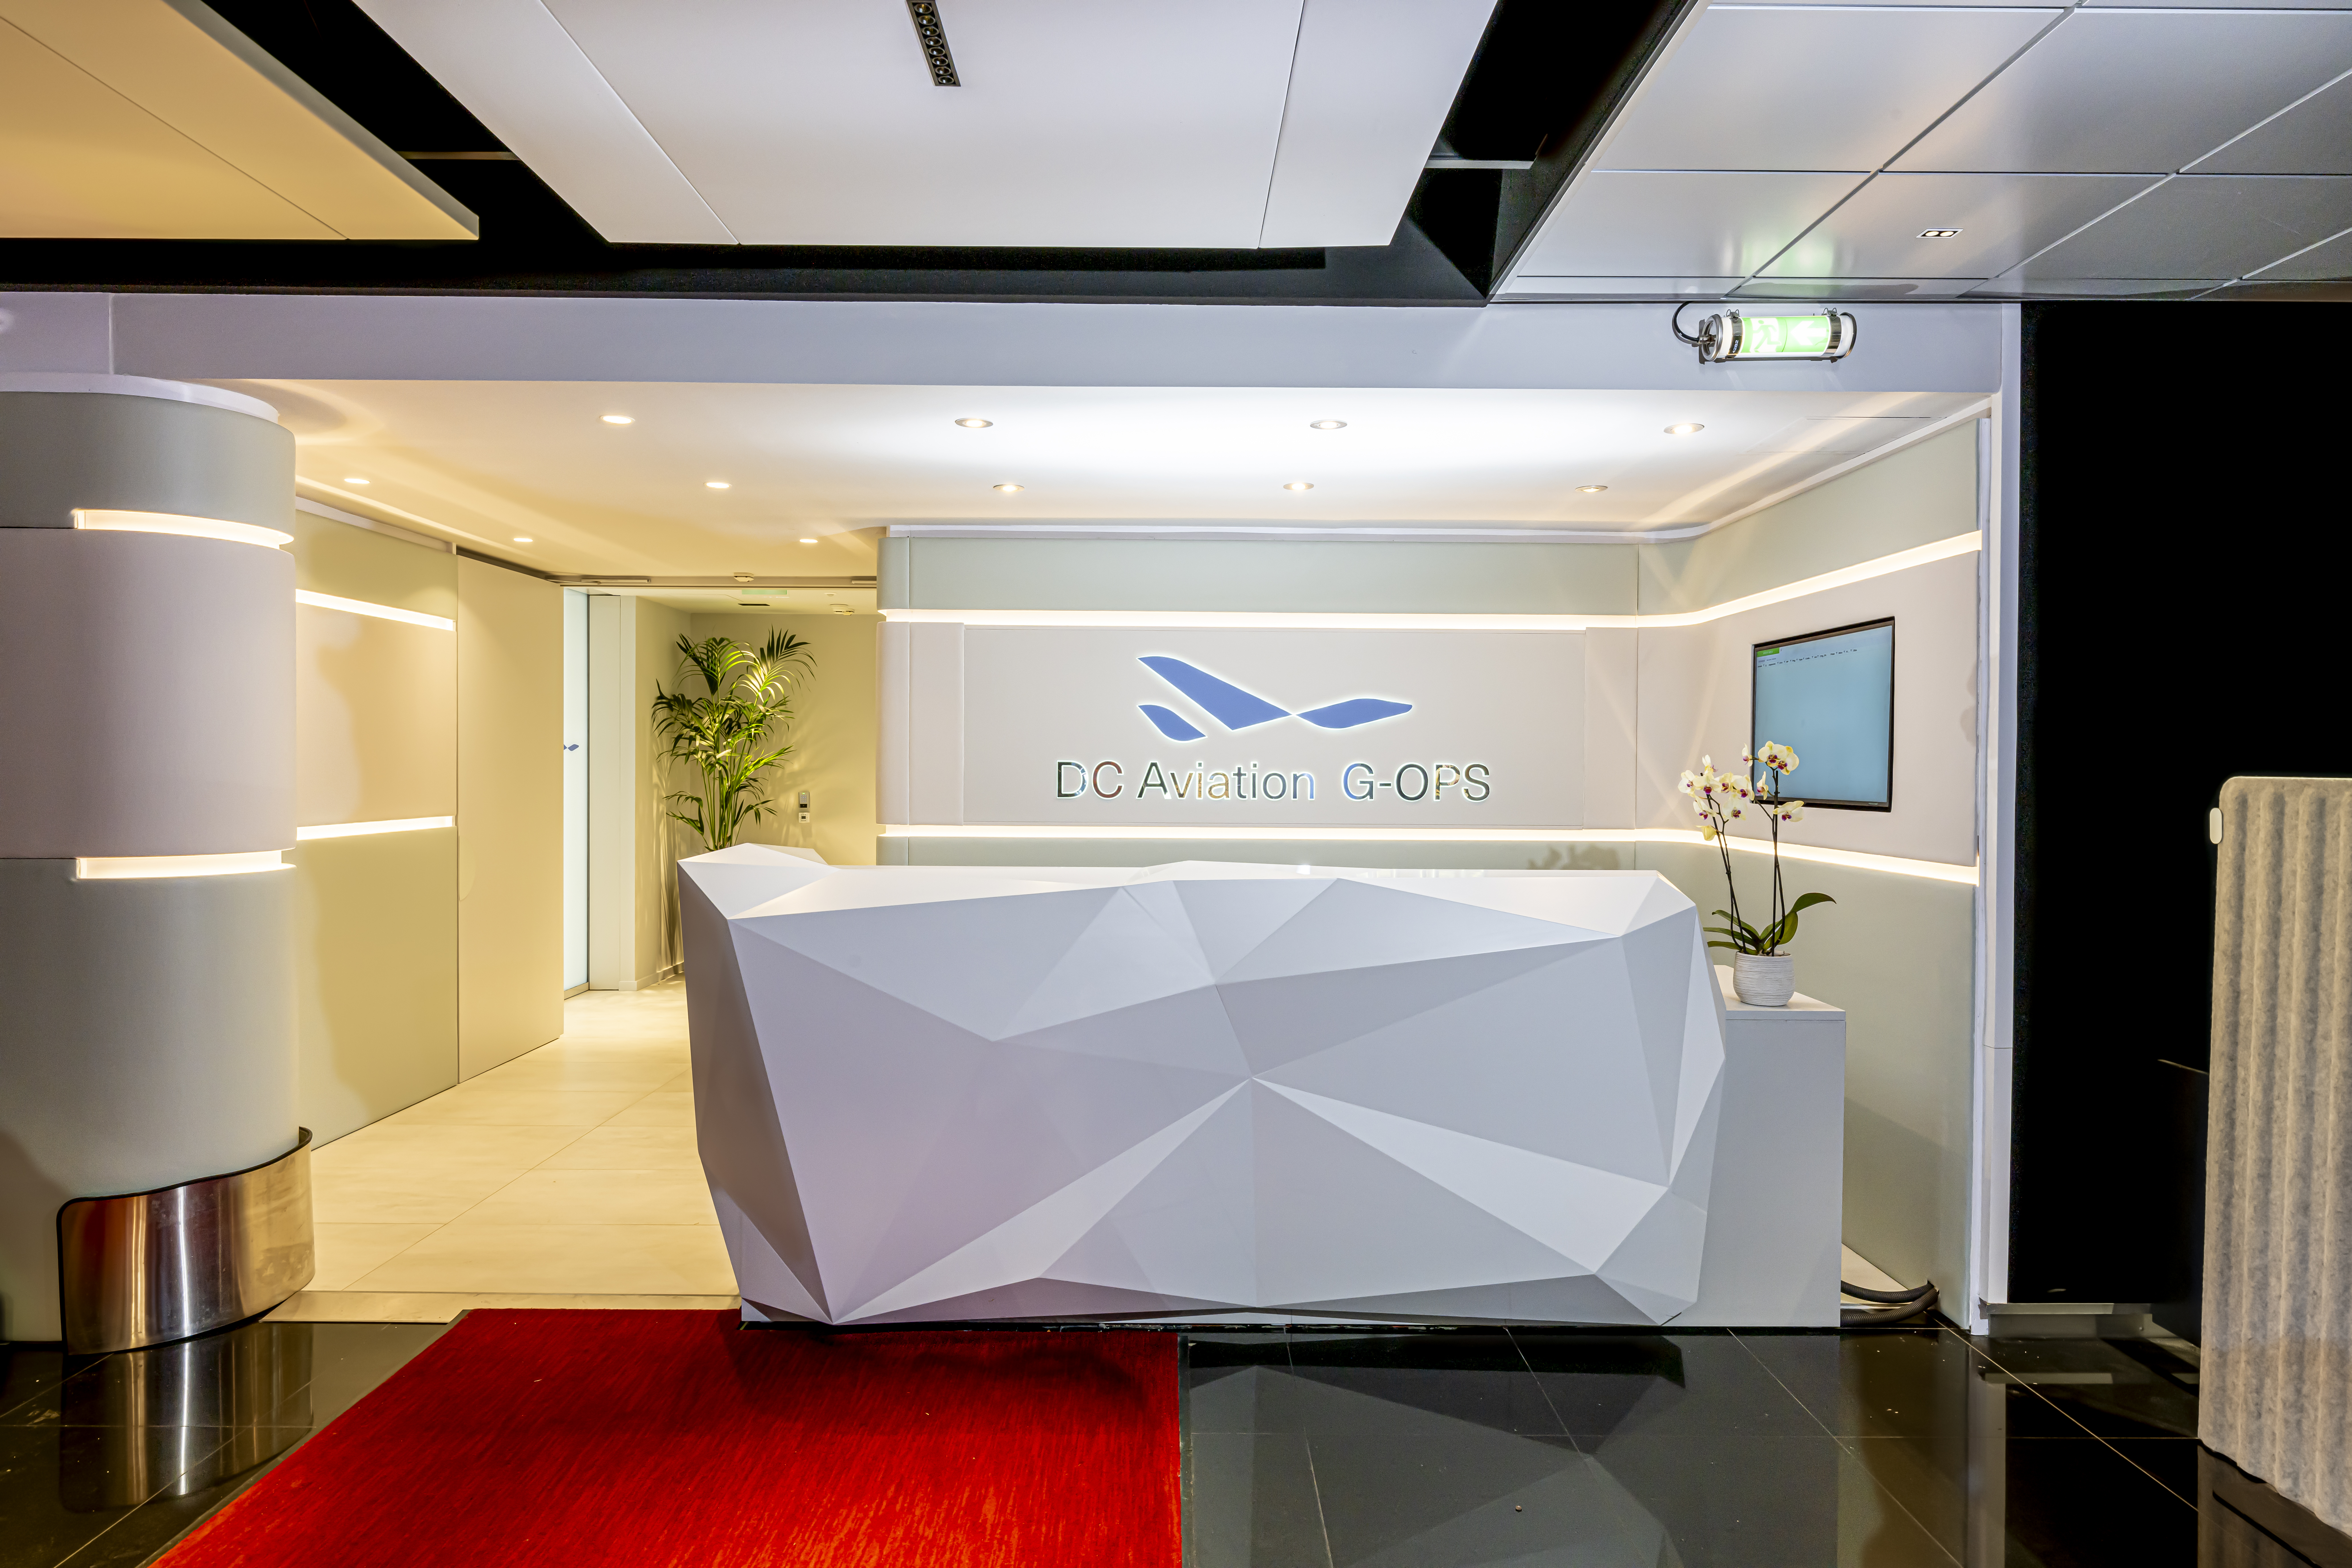 DC Aviation G-OPS opens a newly designed FBO at Nice/LFMN, France